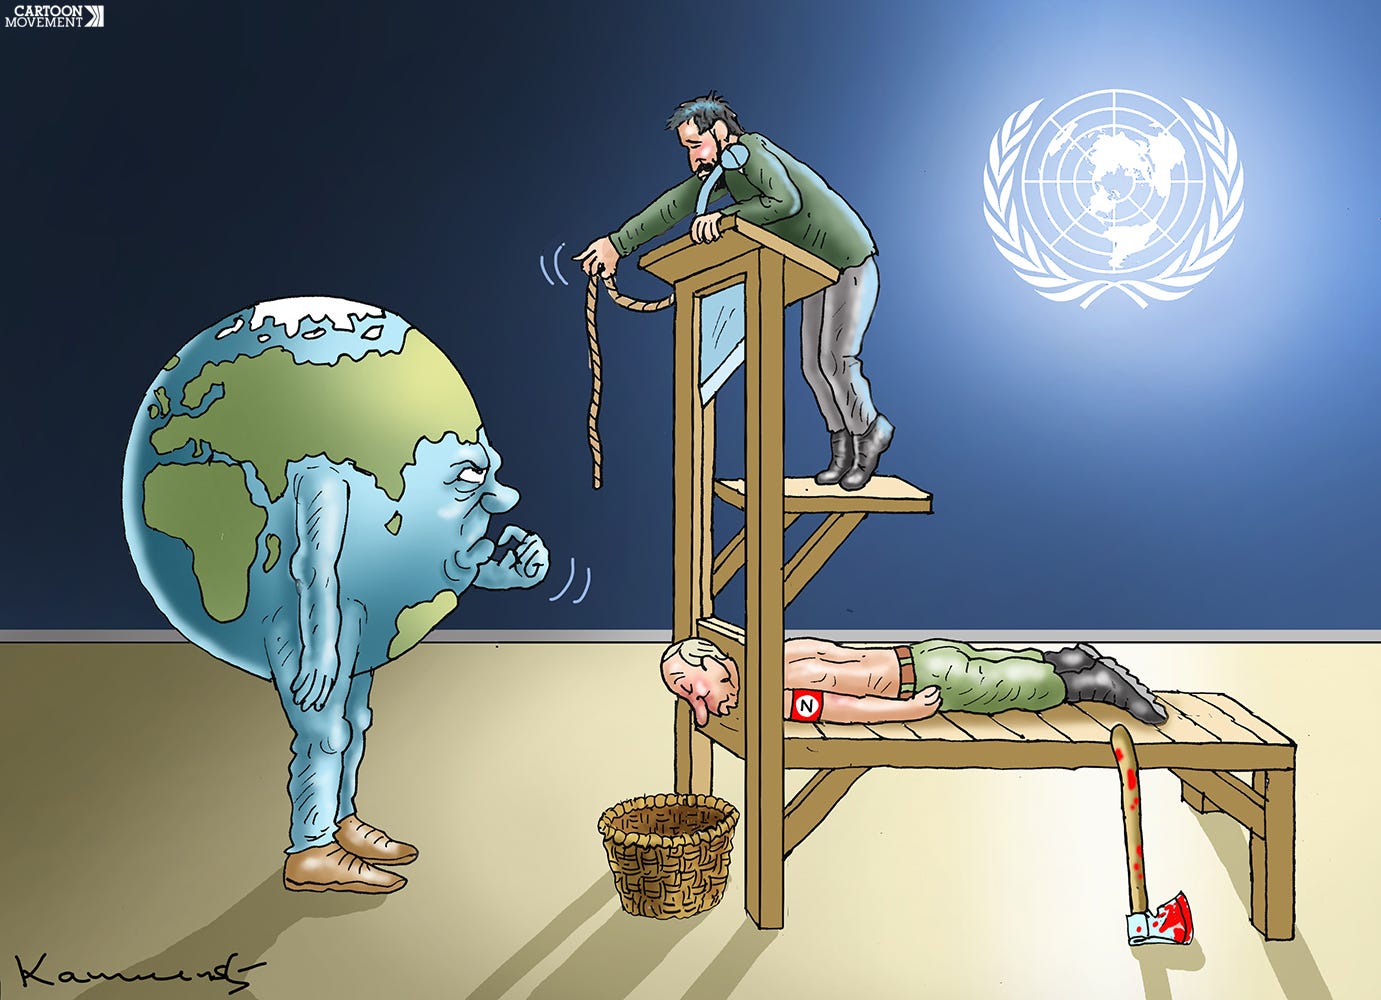 Cartoon showing Putin lying with his head in a guillotine while Zelensky is trying to convince the world to pull the string that will release the blade. In the sky, a UN logo shines like the moon.